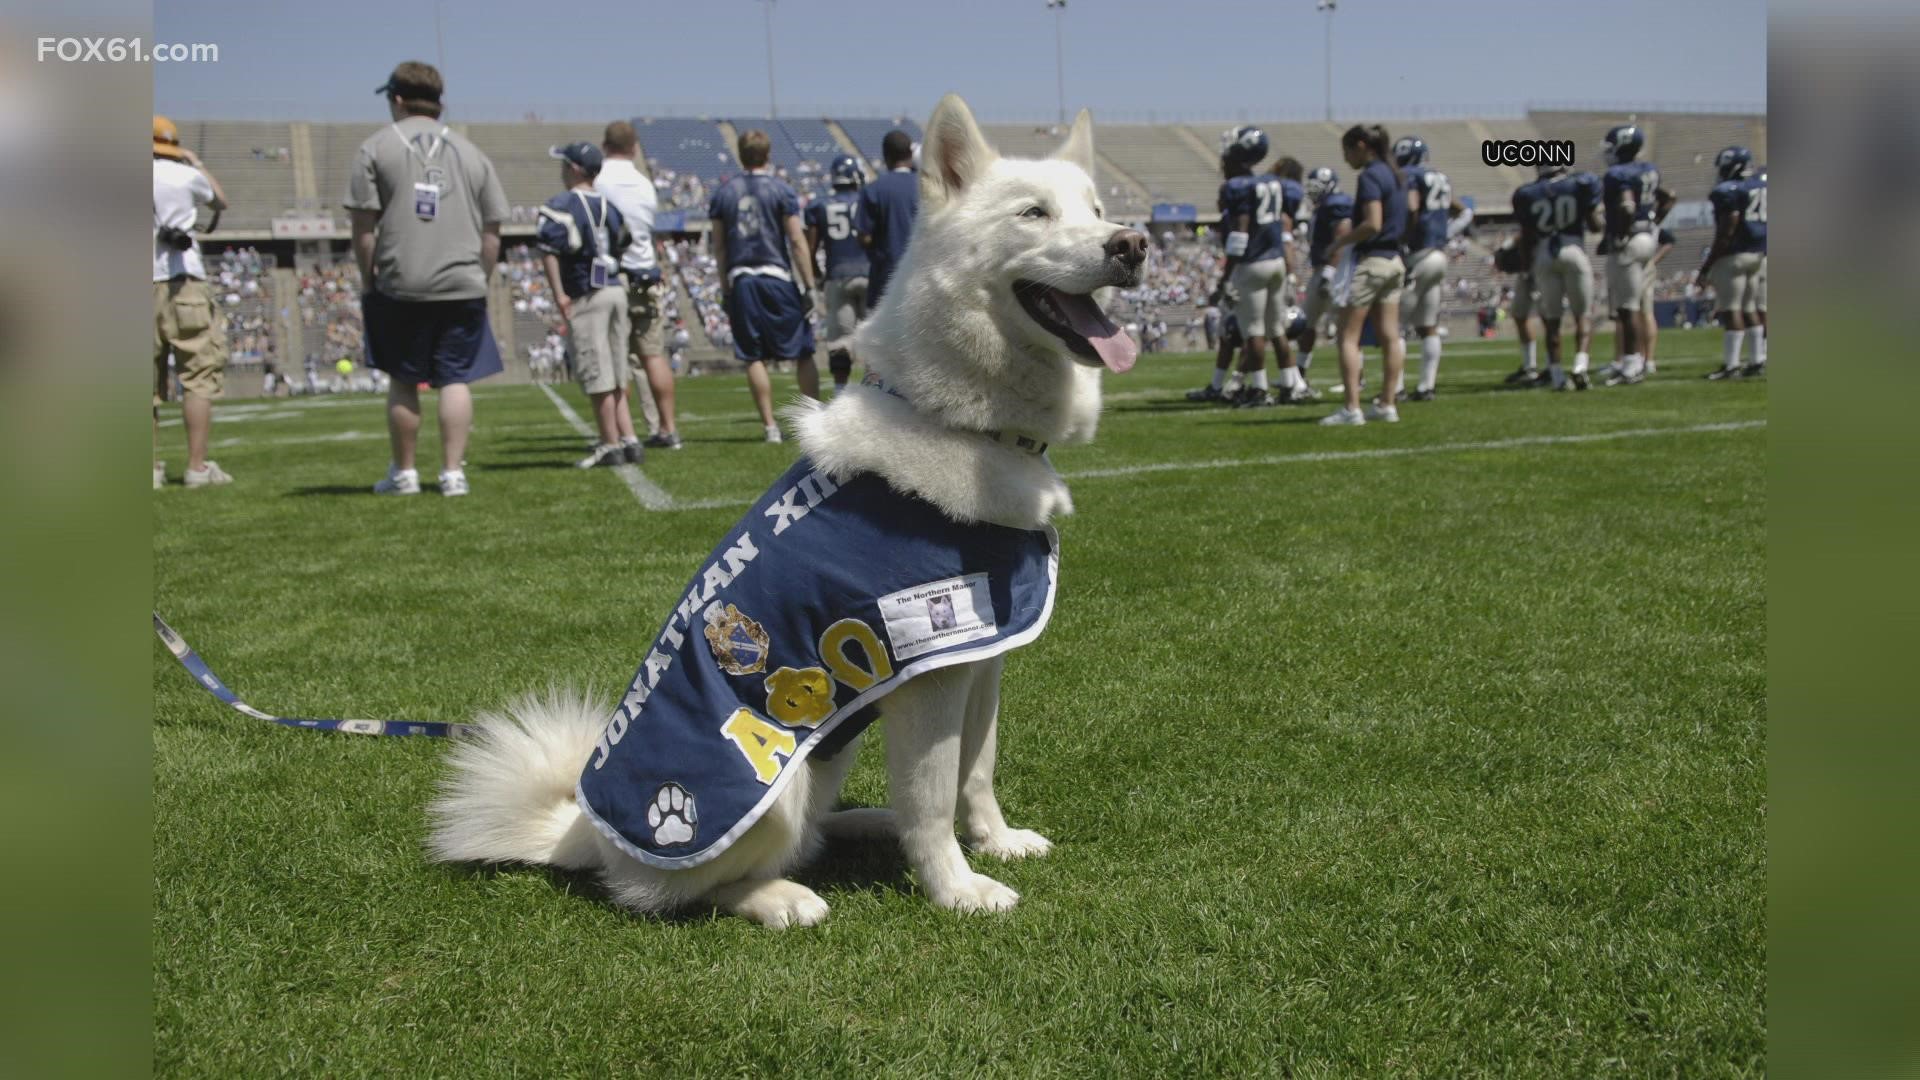 The husky was UConn's official mascot for almost six years before going into retirement. He made his public debut on March 9, 2008, at a men's basketball.